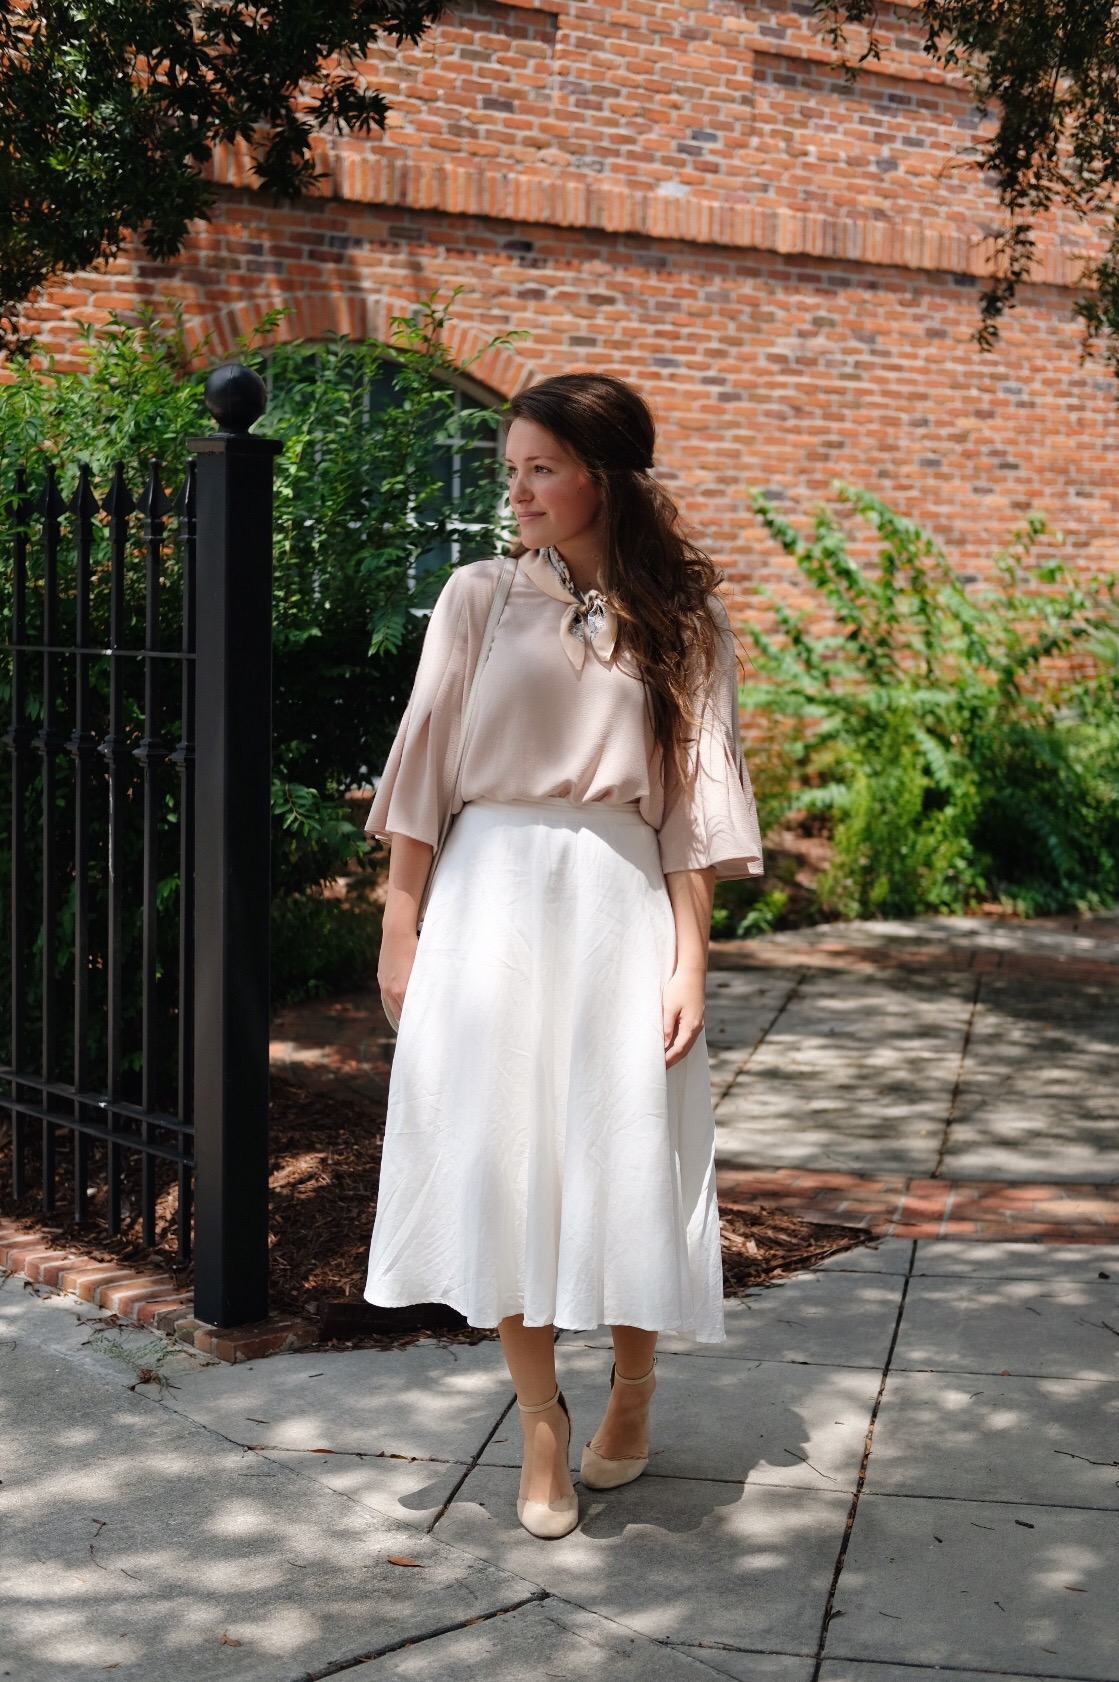 Linen Skirts and Neck Scarves